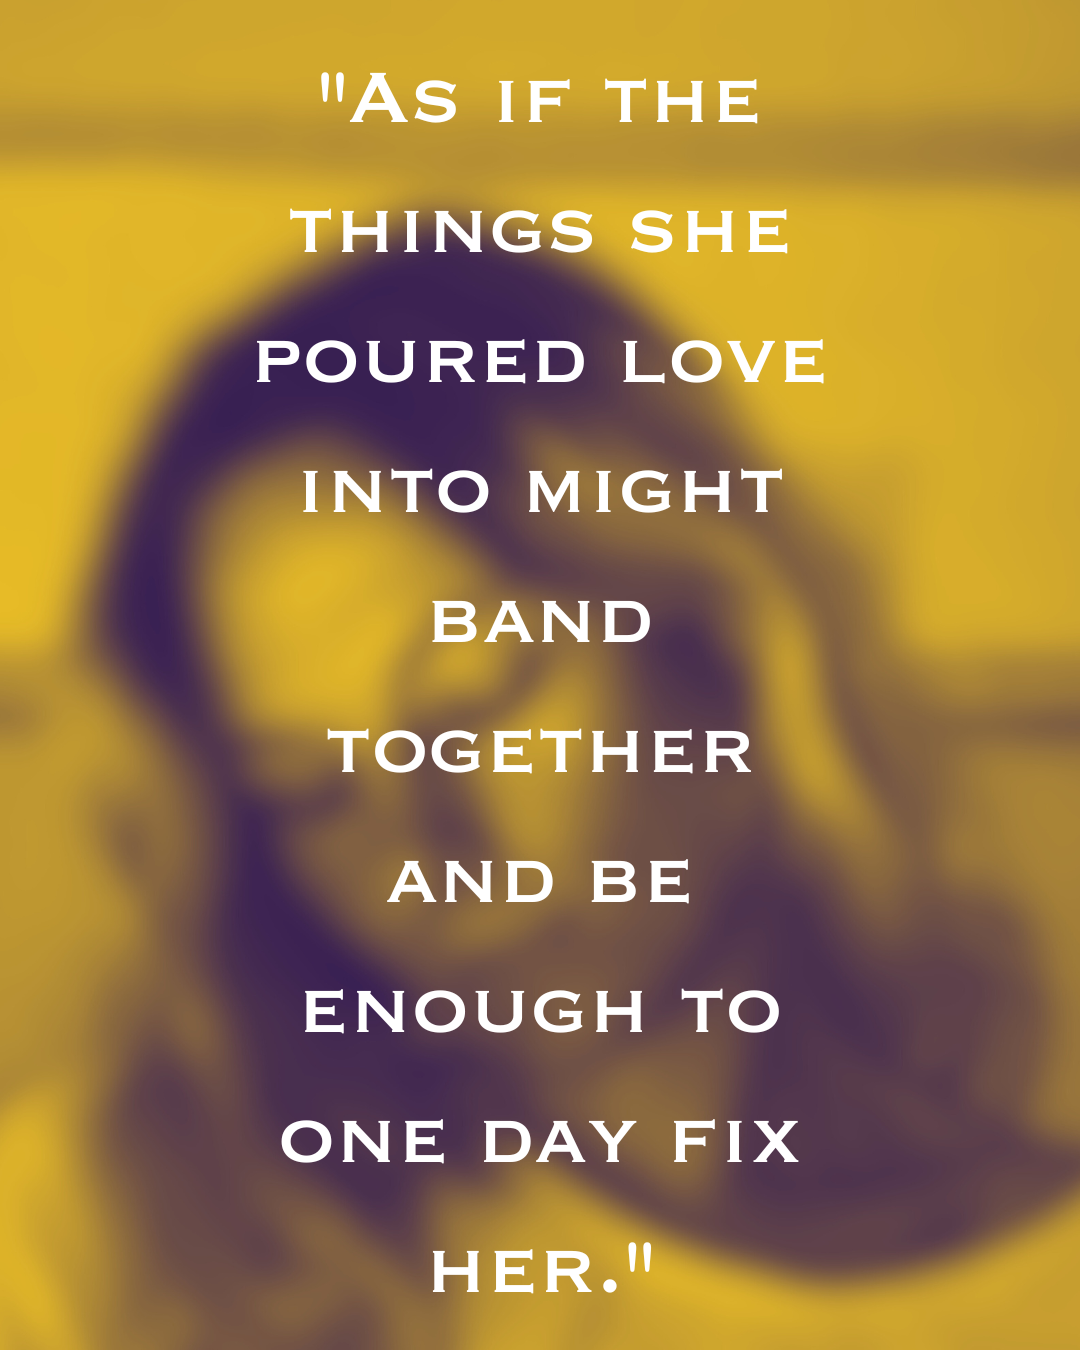 As if the things she poured love into might band together and be enough to one day fix her..png